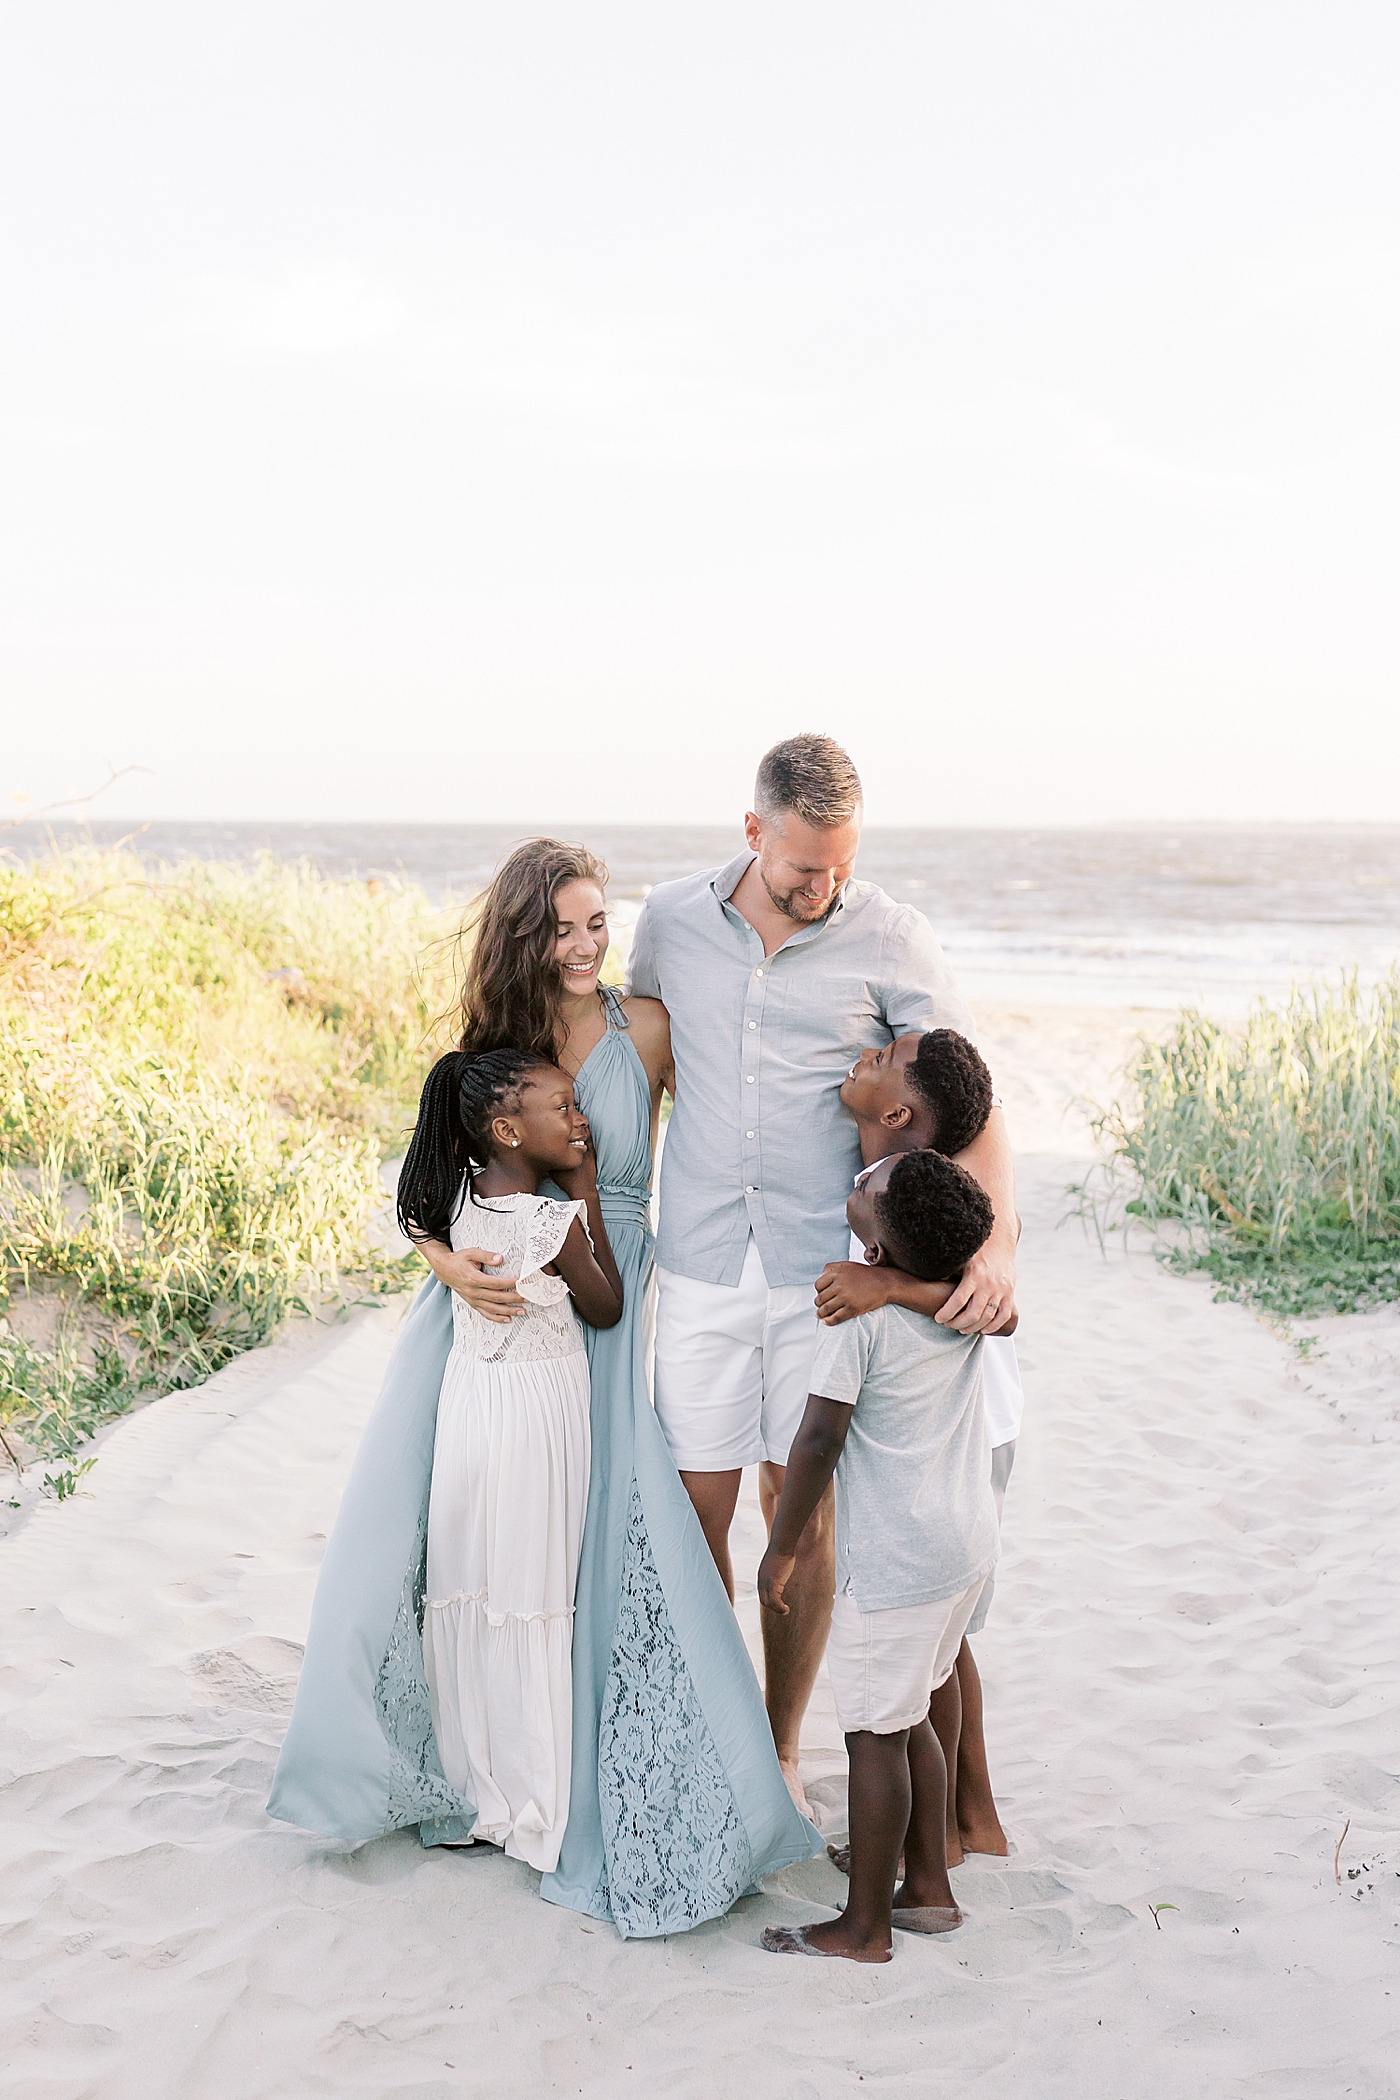 Family of five on the beach | Image by Caitlyn Motycka